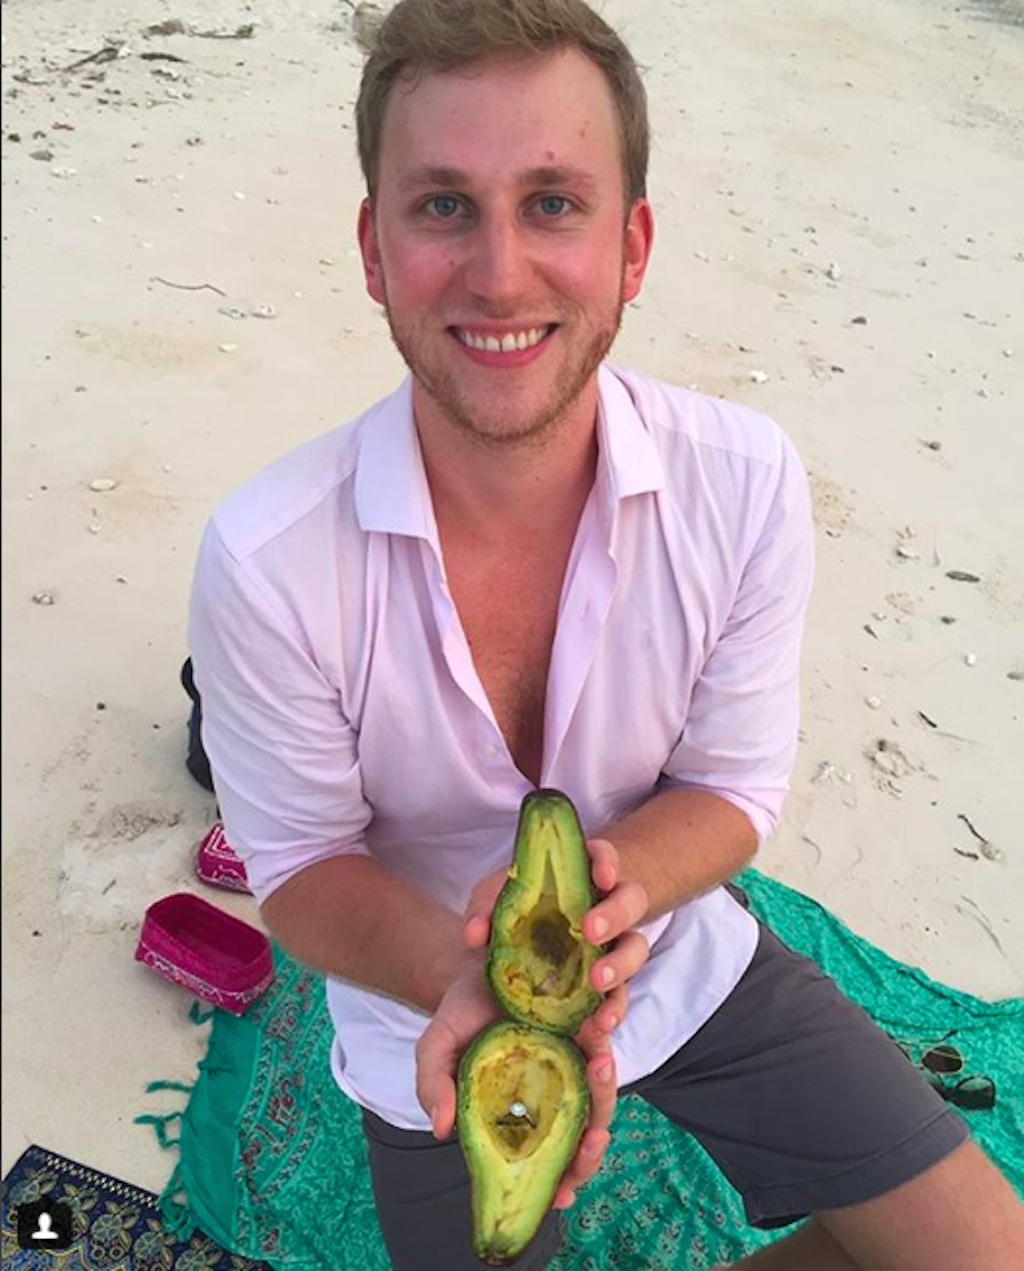 man proposes with avocado on beach.